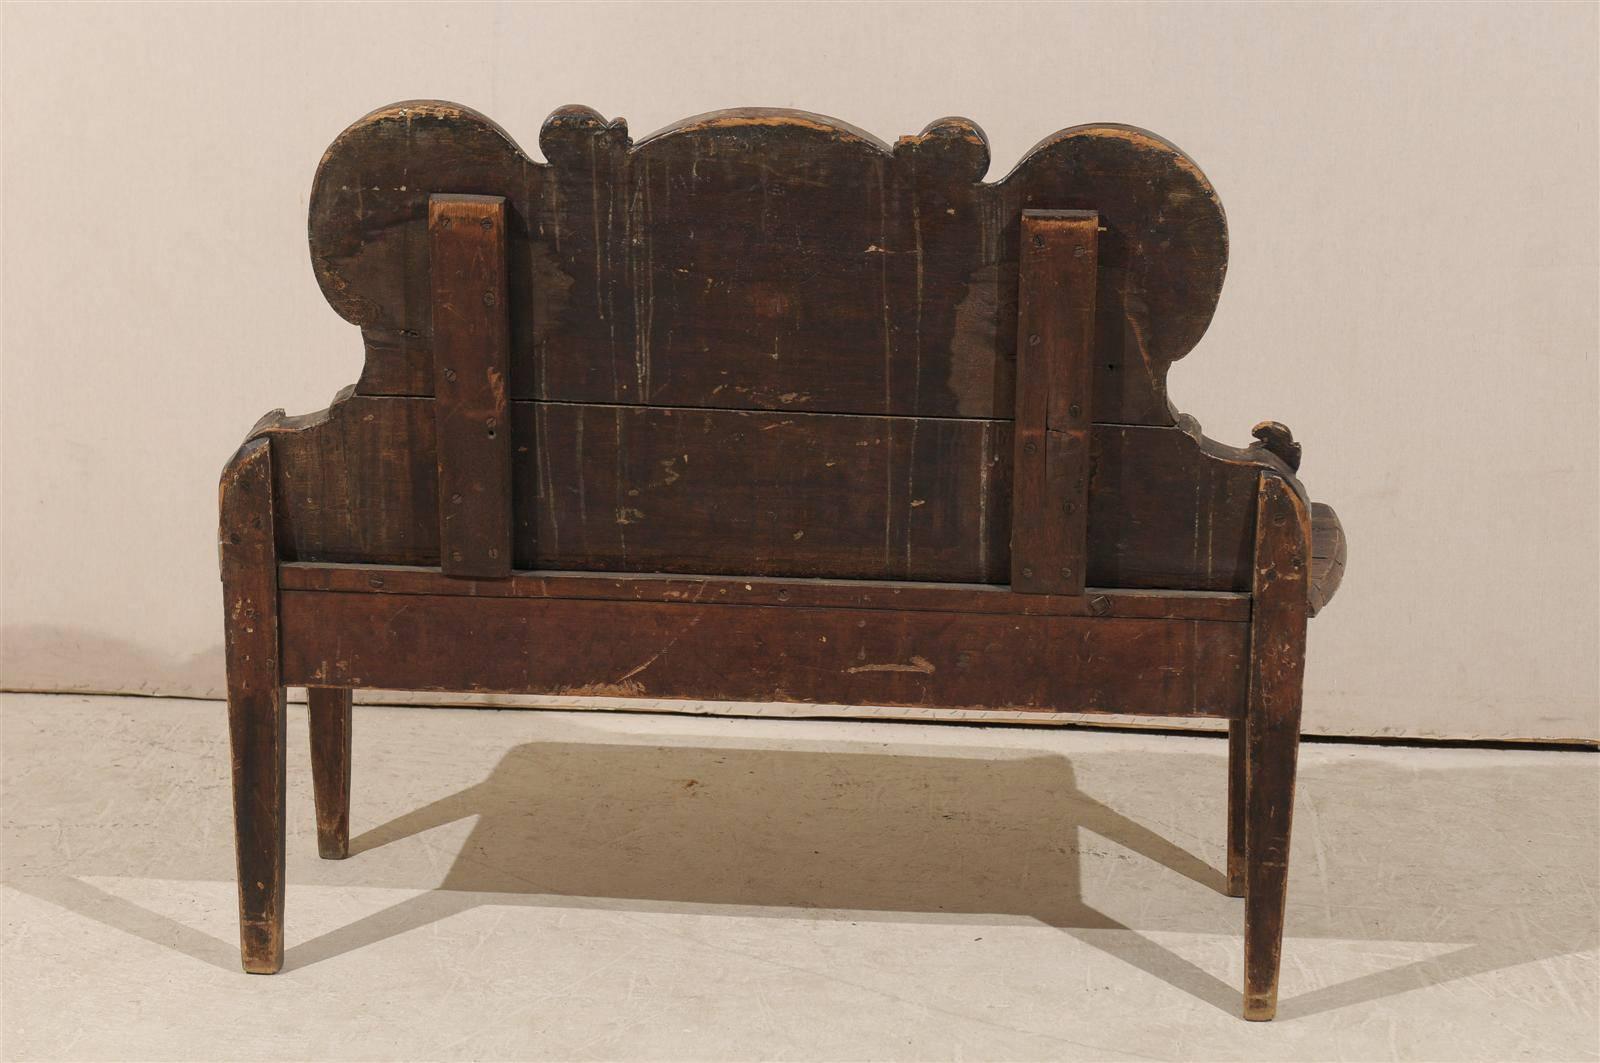 An Italian 18th Century Richly-Carved Wood Bench with Ornate Backrest   4